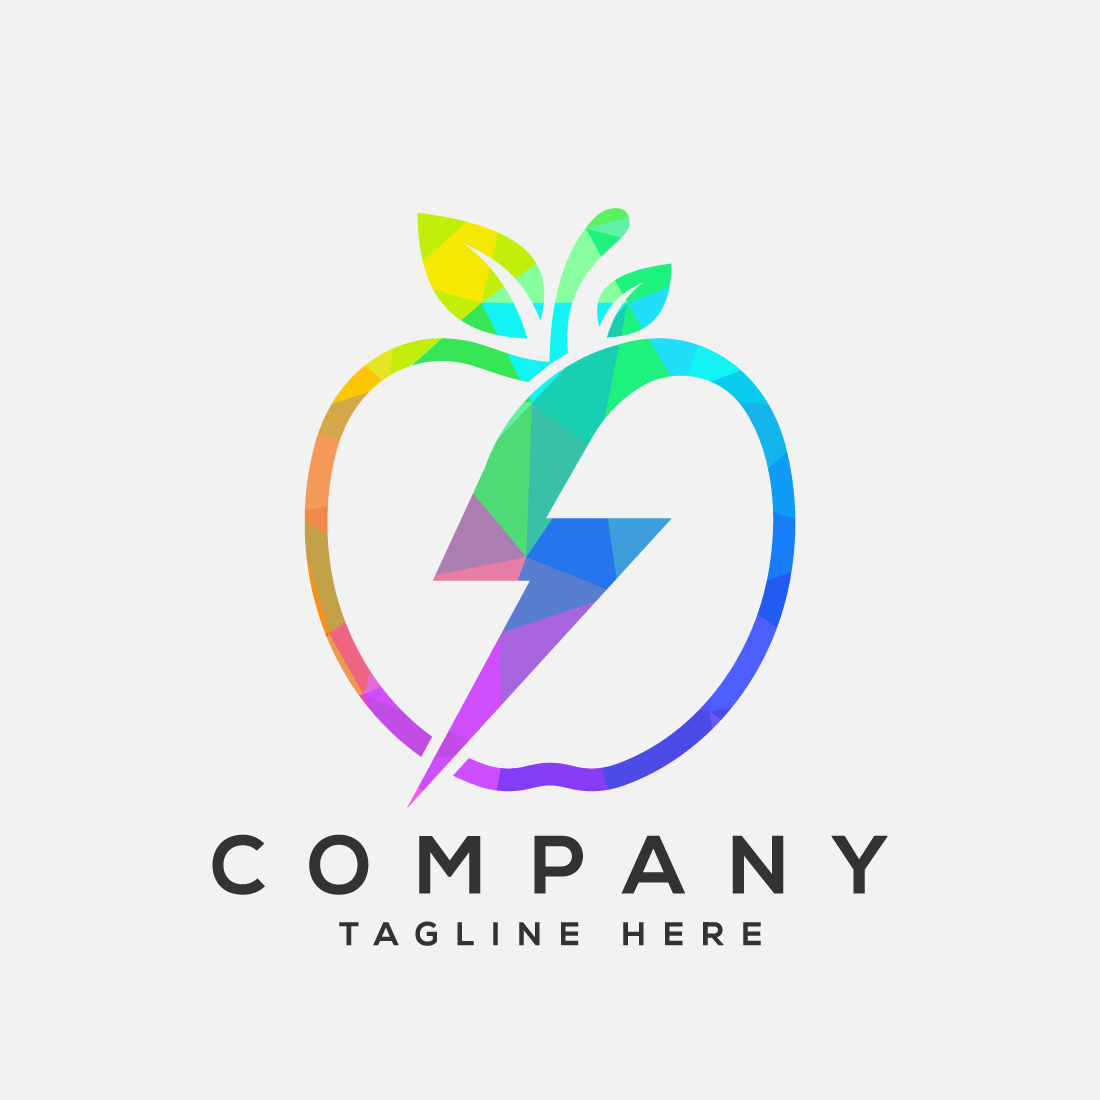 Low poly style apple and electricity logo sign symbol in flat style preview image.